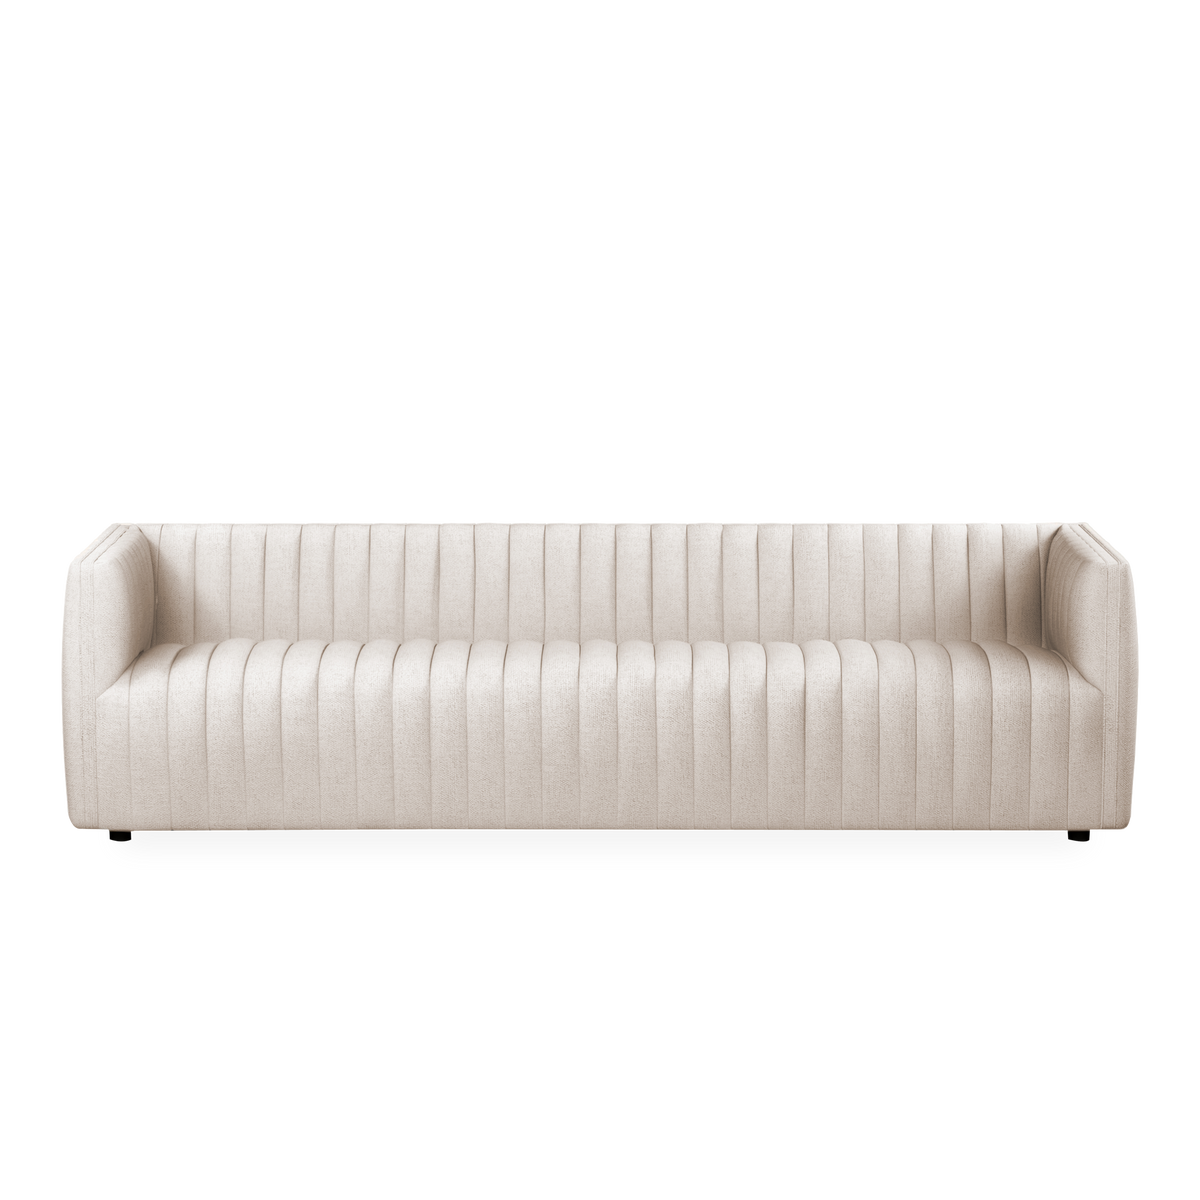 With its dramatic channels, the Reamer Sofa offers a textural interest for your space.